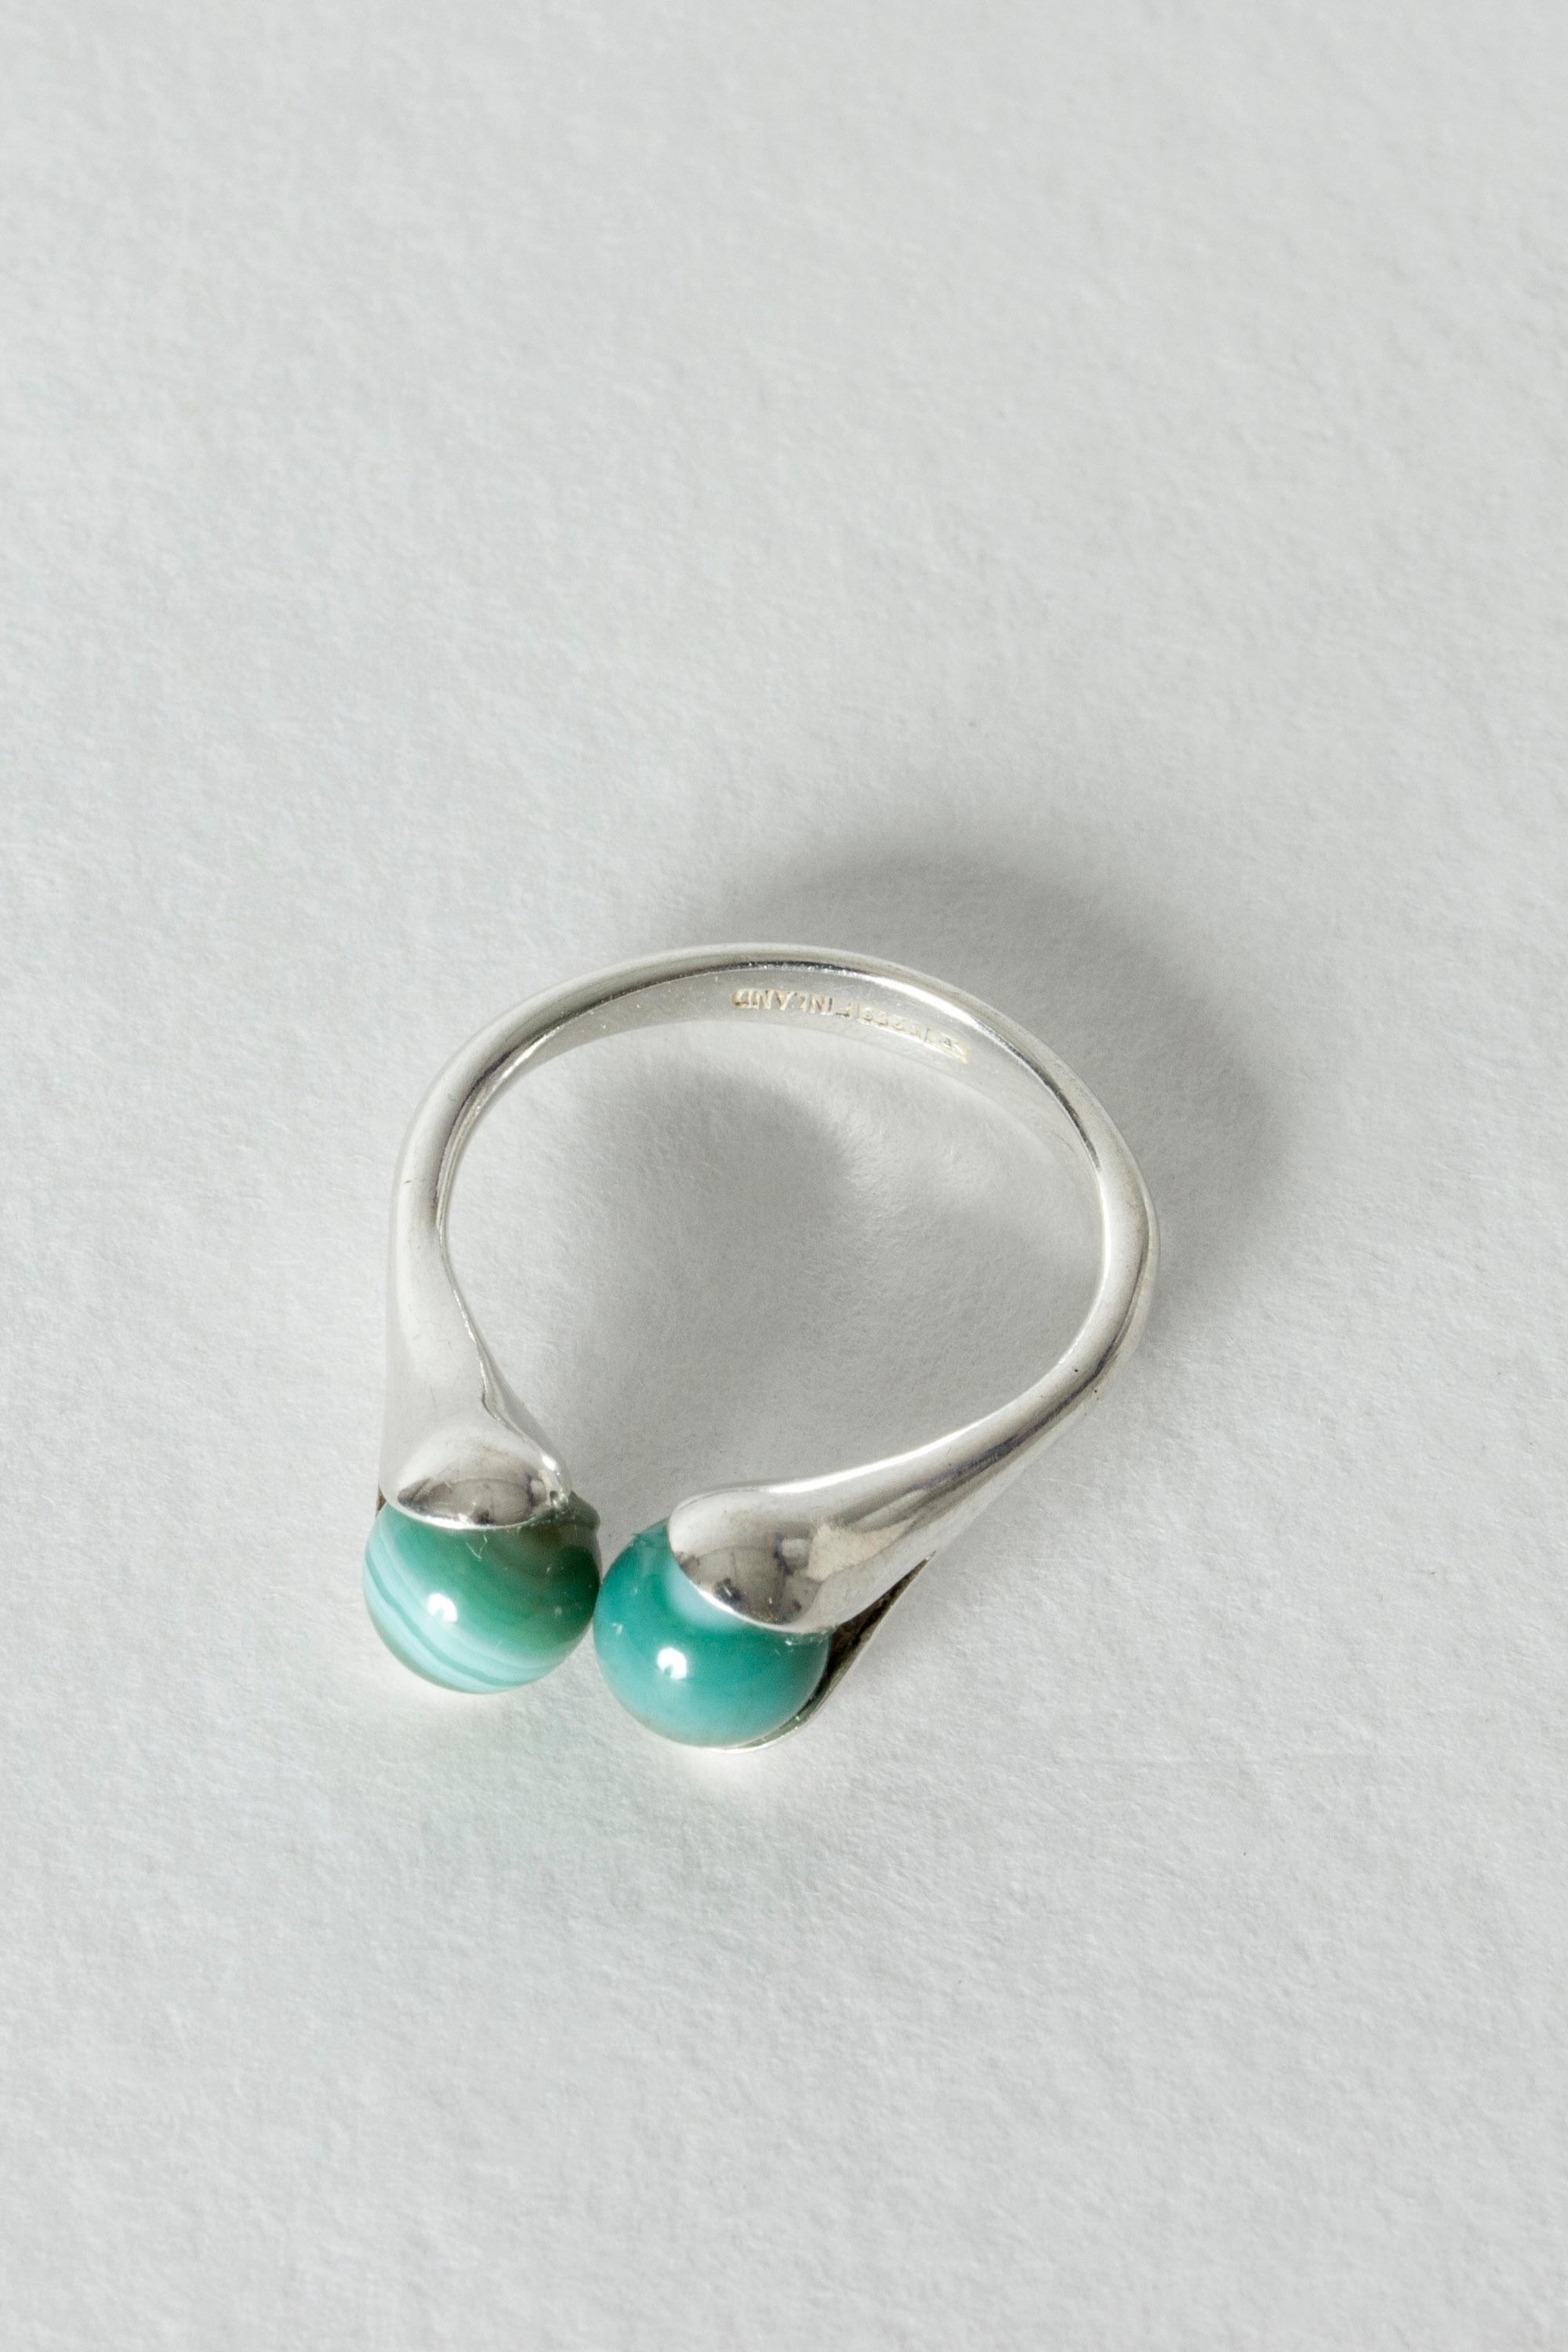 Women's or Men's Silver and Banded Agate Ring by Elis Kauppi for Kupittaan Kulta, Finland, 1960s